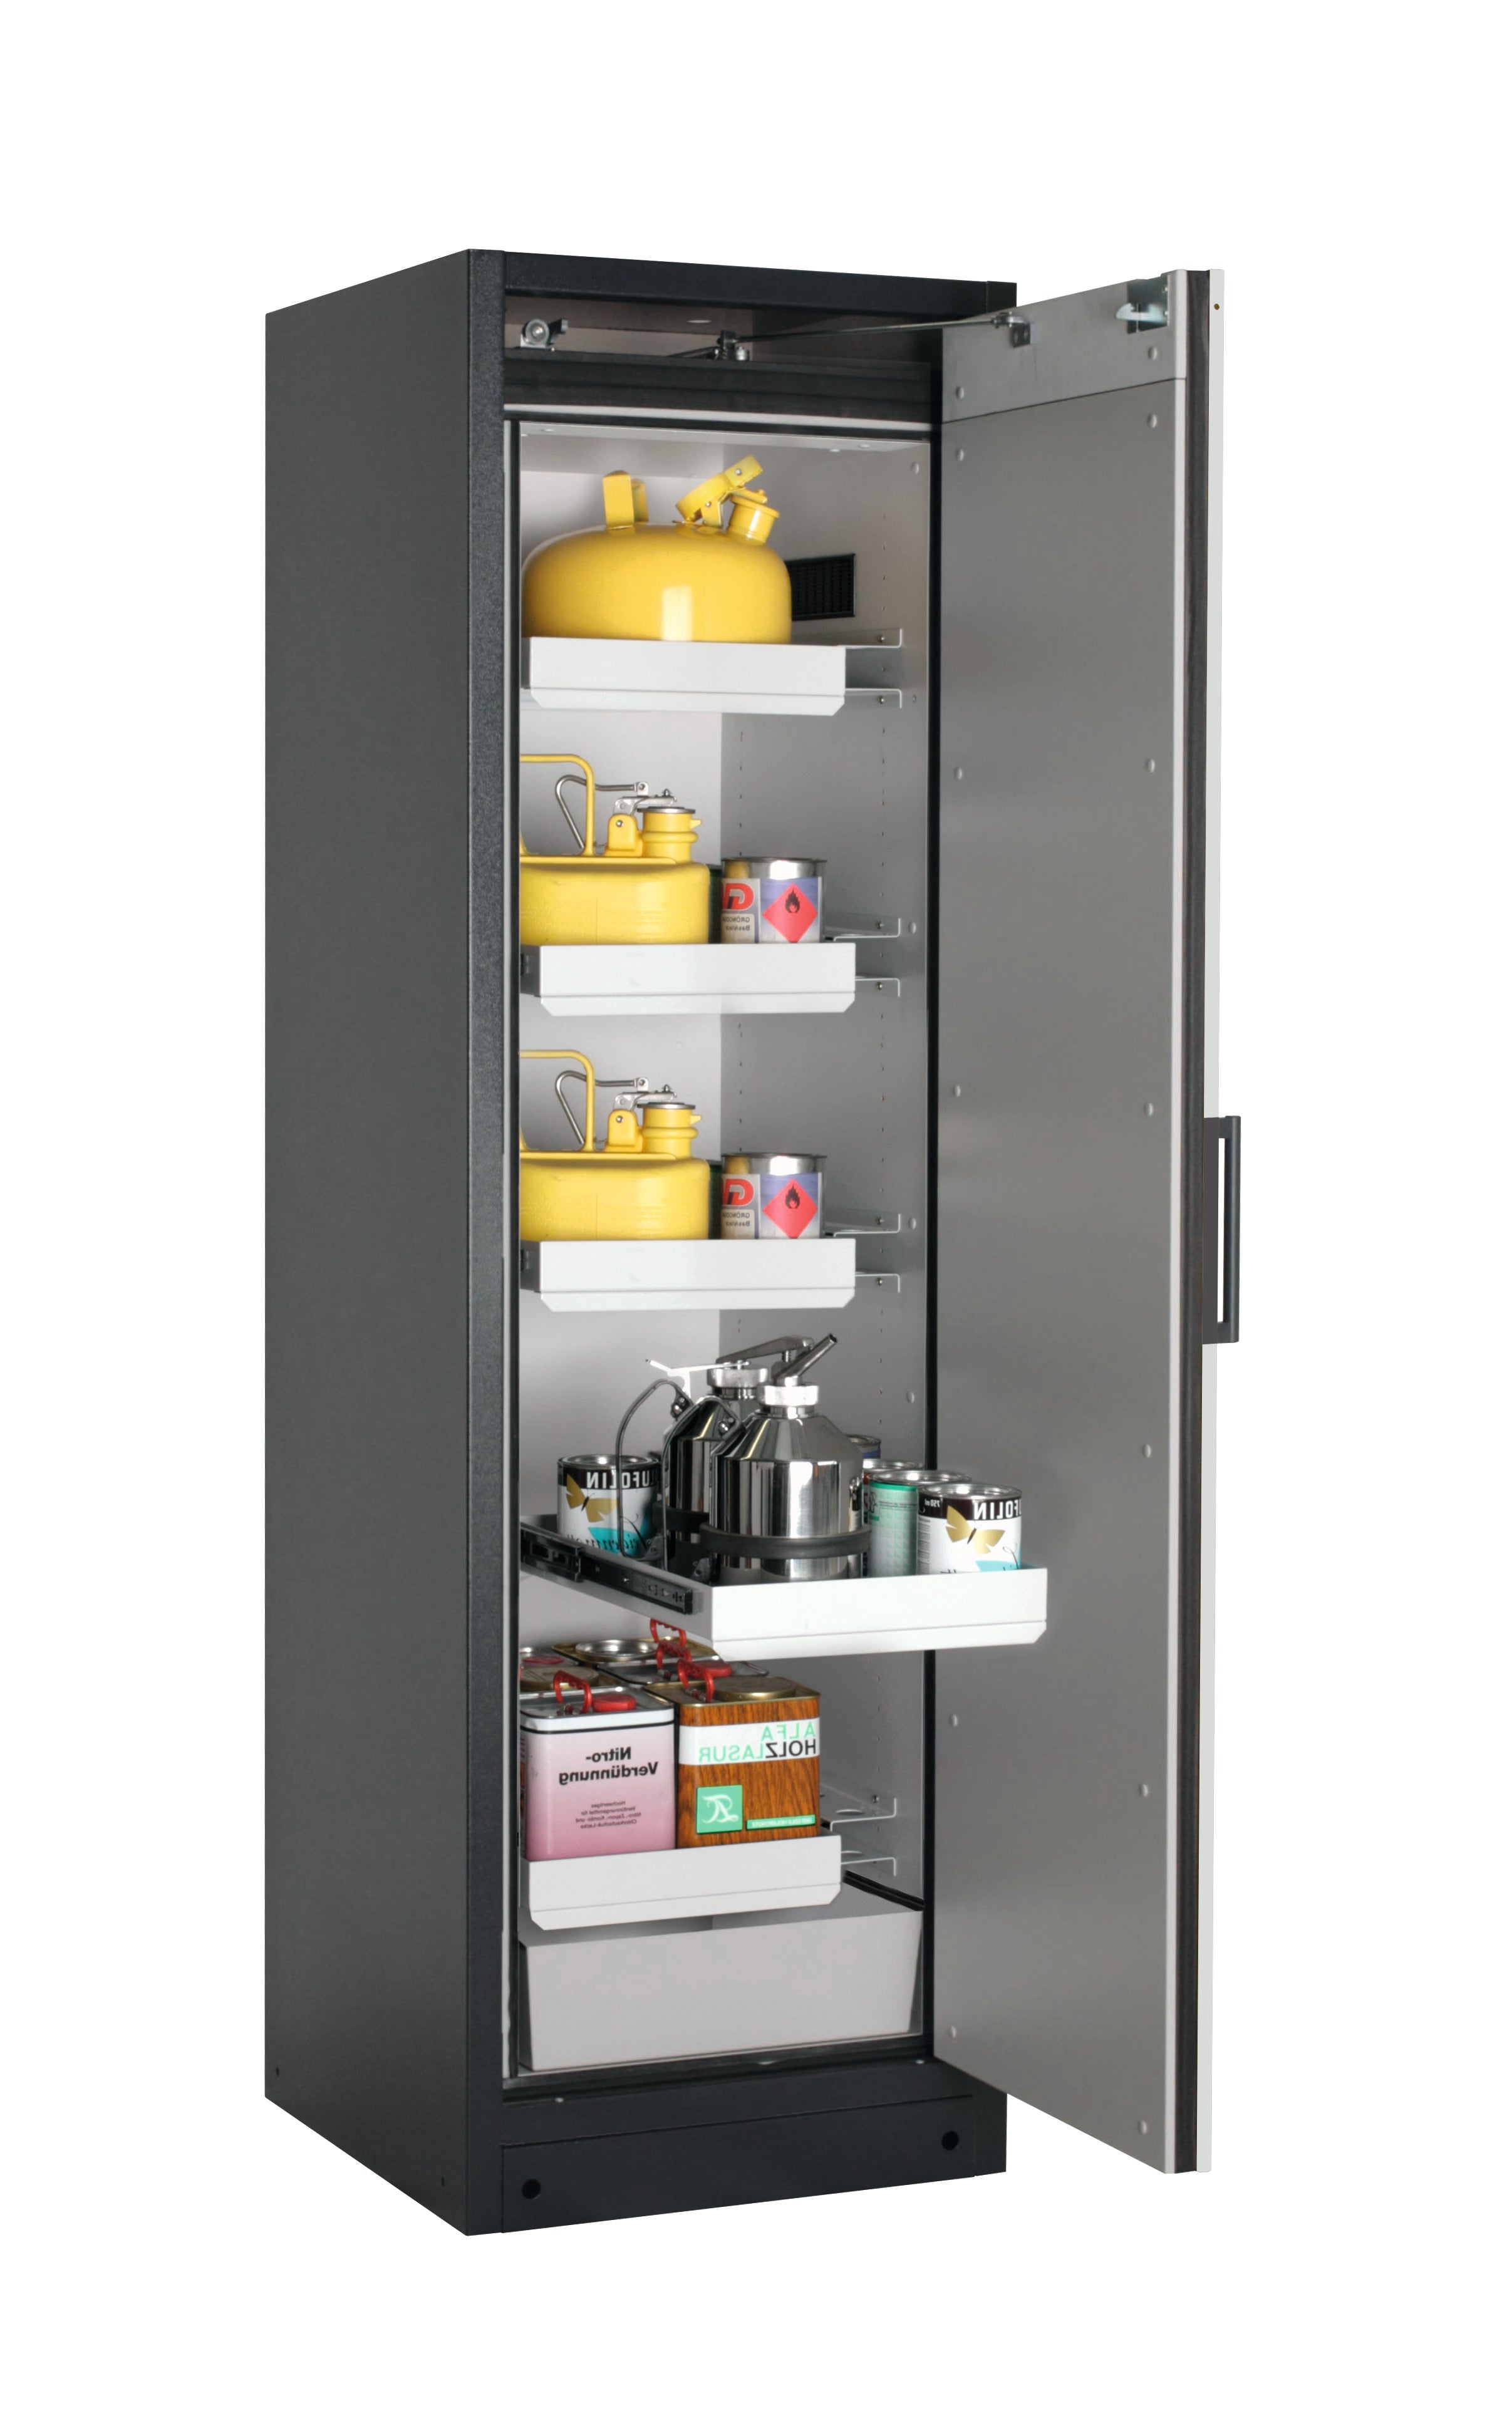 Type 90 safety storage cabinet Q-CLASSIC-90 model Q90.195.060.R in light grey RAL 7035 with 4x drawer (standard) (sheet steel),